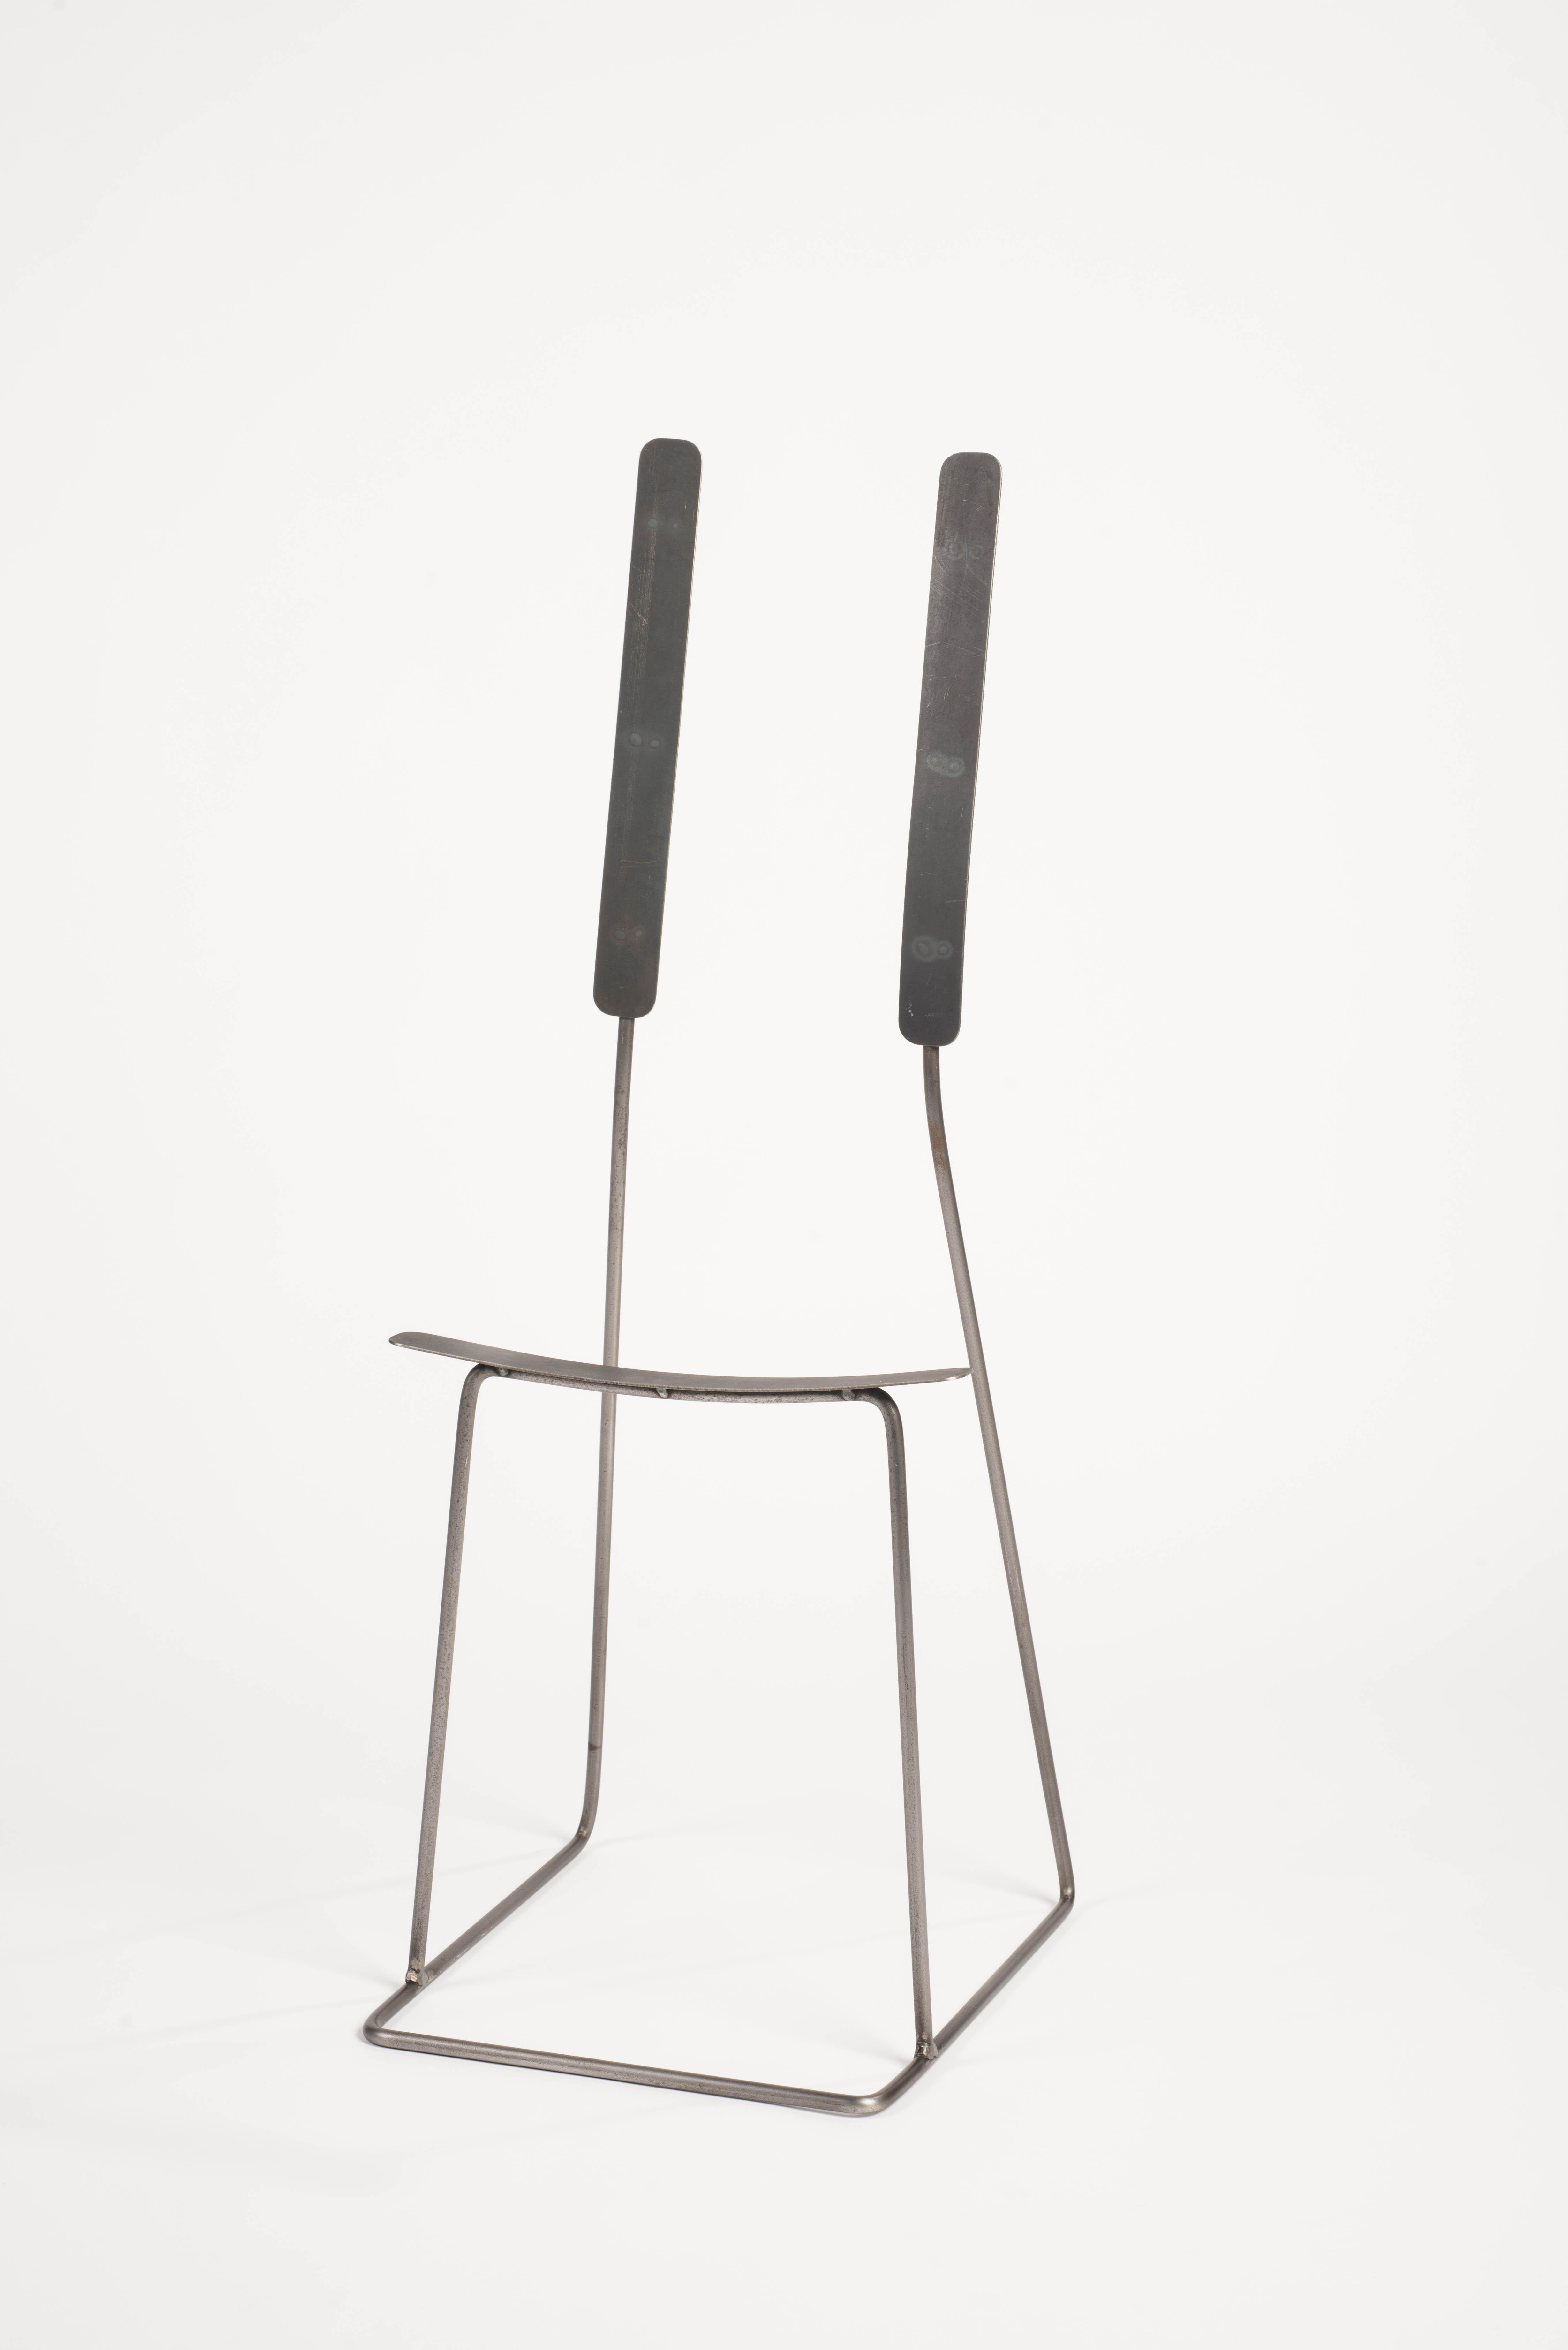 Two Notes chair by Neil Nenner
Punctuation Marks
Dimensions: H96 x L 40 x W 35 cm
Materials: Steel tubes and rods with a natural finish
 Corten sheets 
 
Neil Nenner (b.1977, Kibbutz Mevo Hama), Independent designer / Artist and lecture in